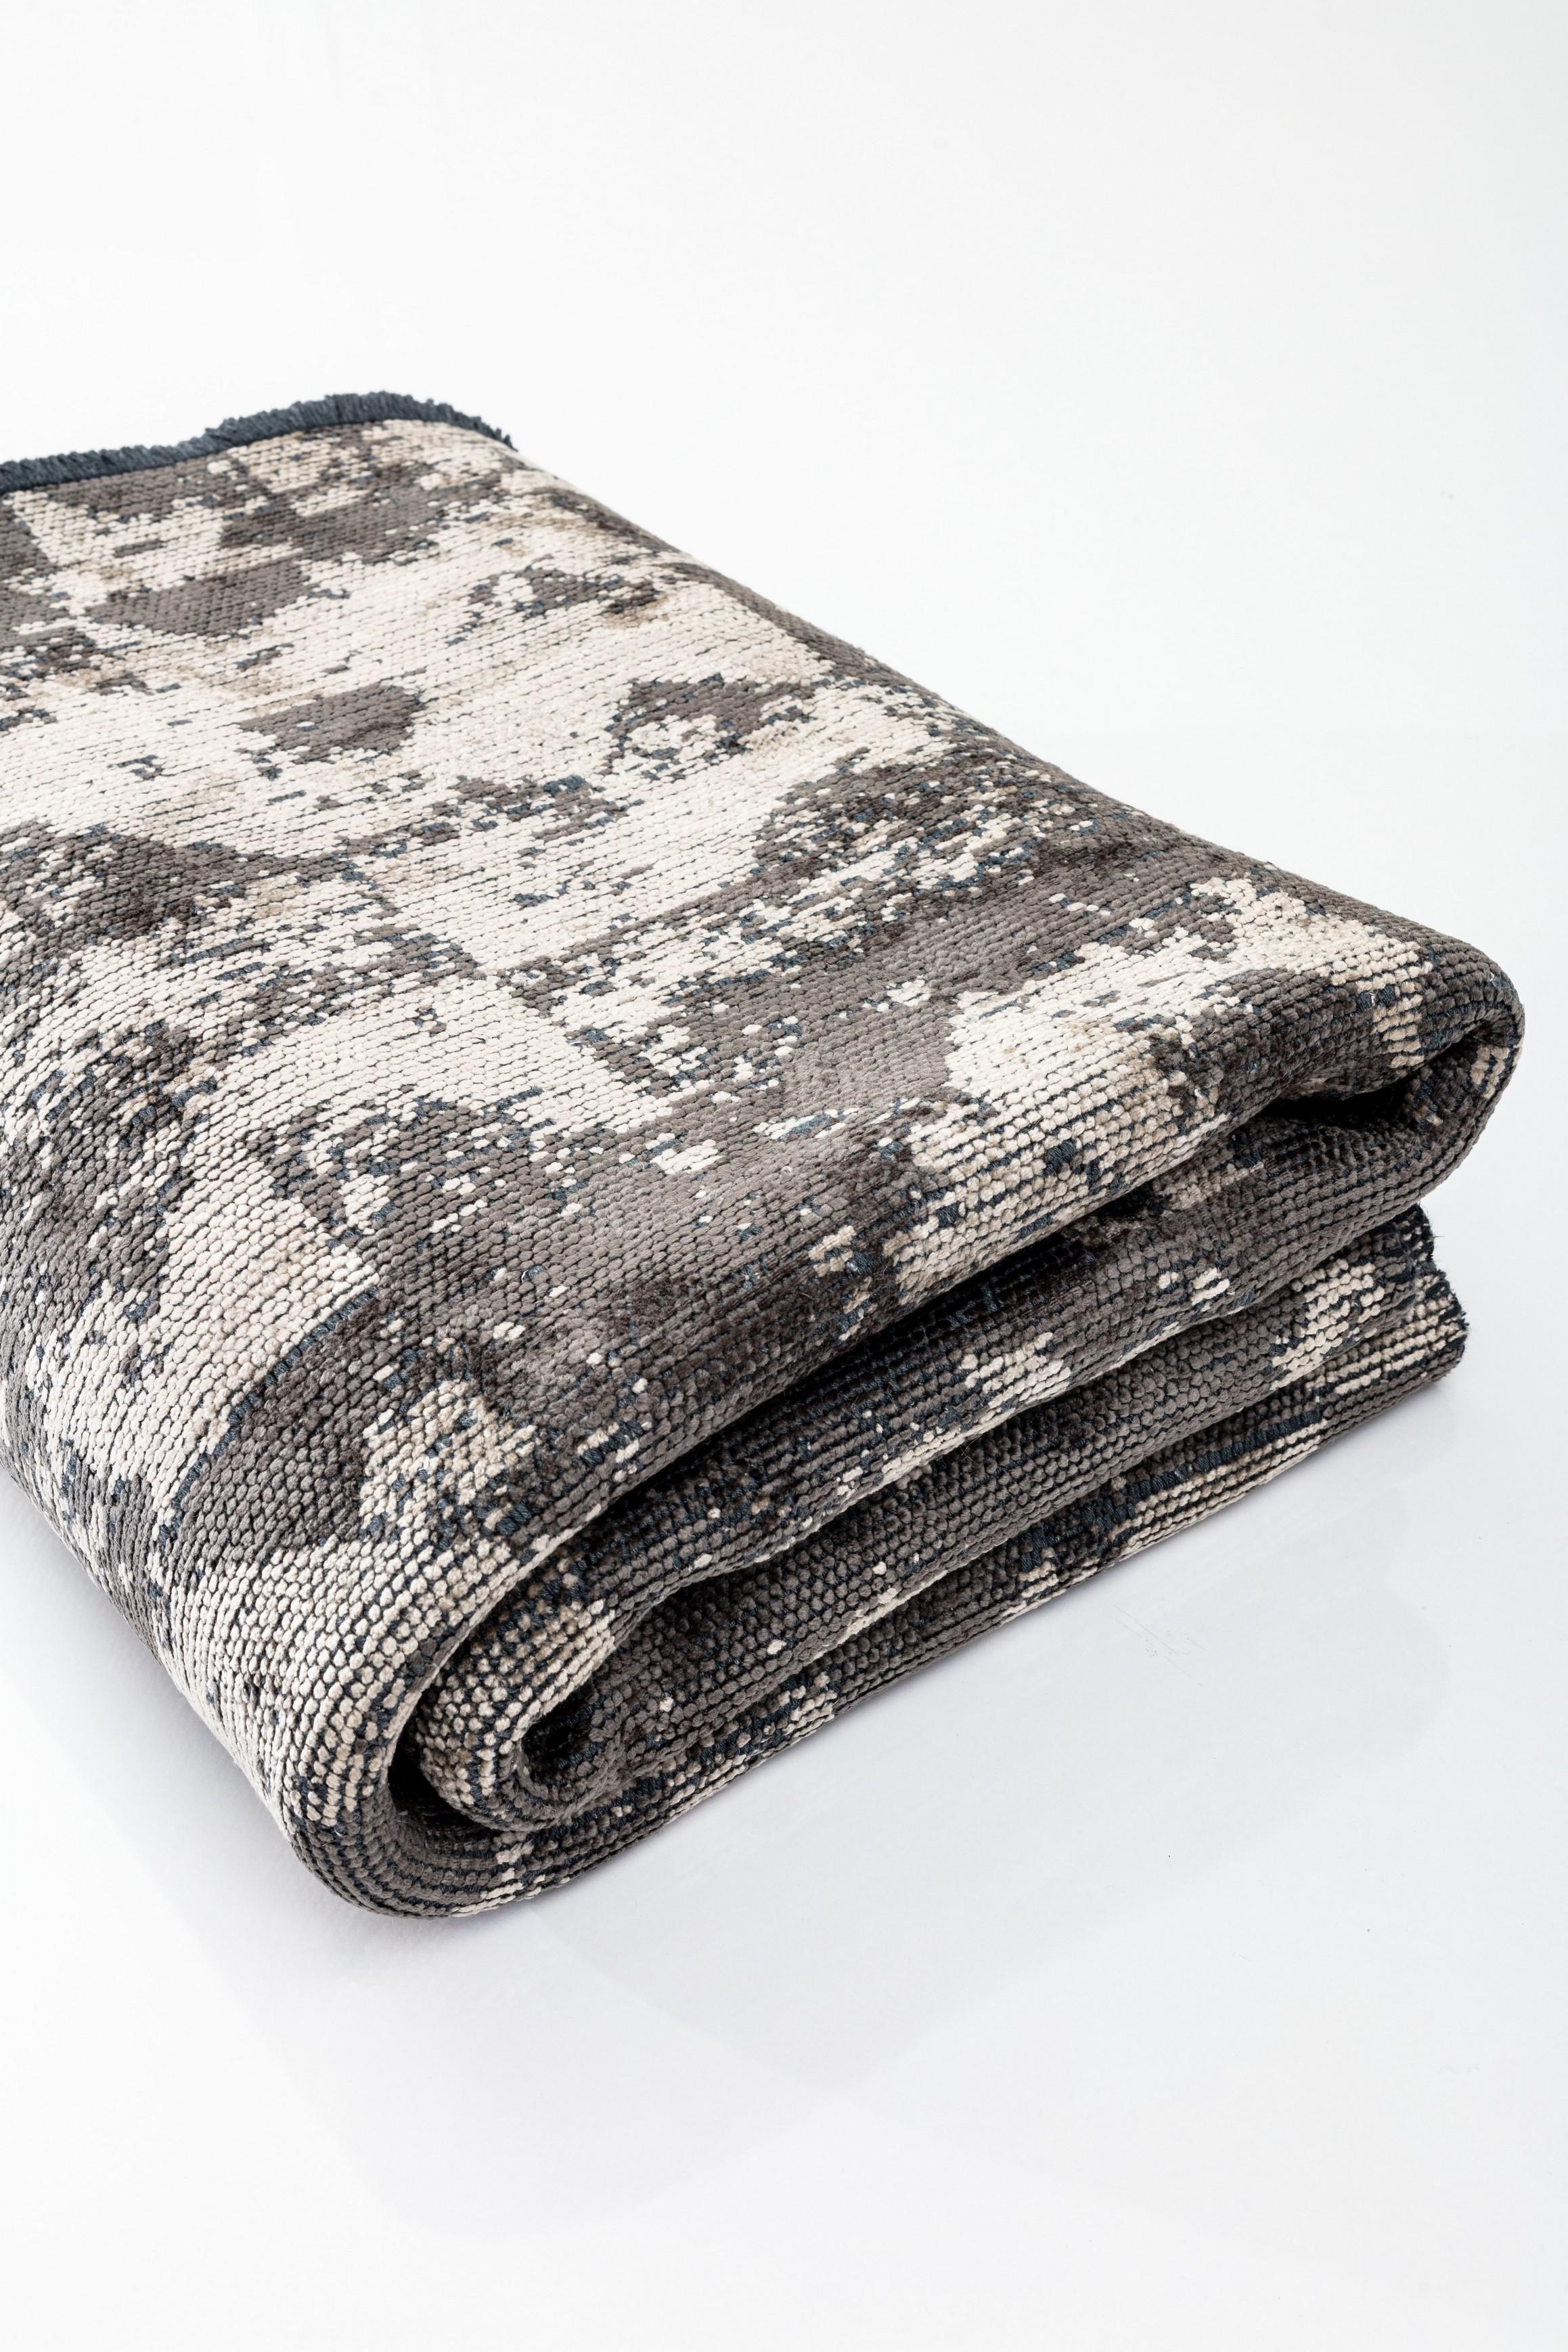 For Sale:  (Gray) Modern Camouflage Luxury Hand-Finished Area Rug 4